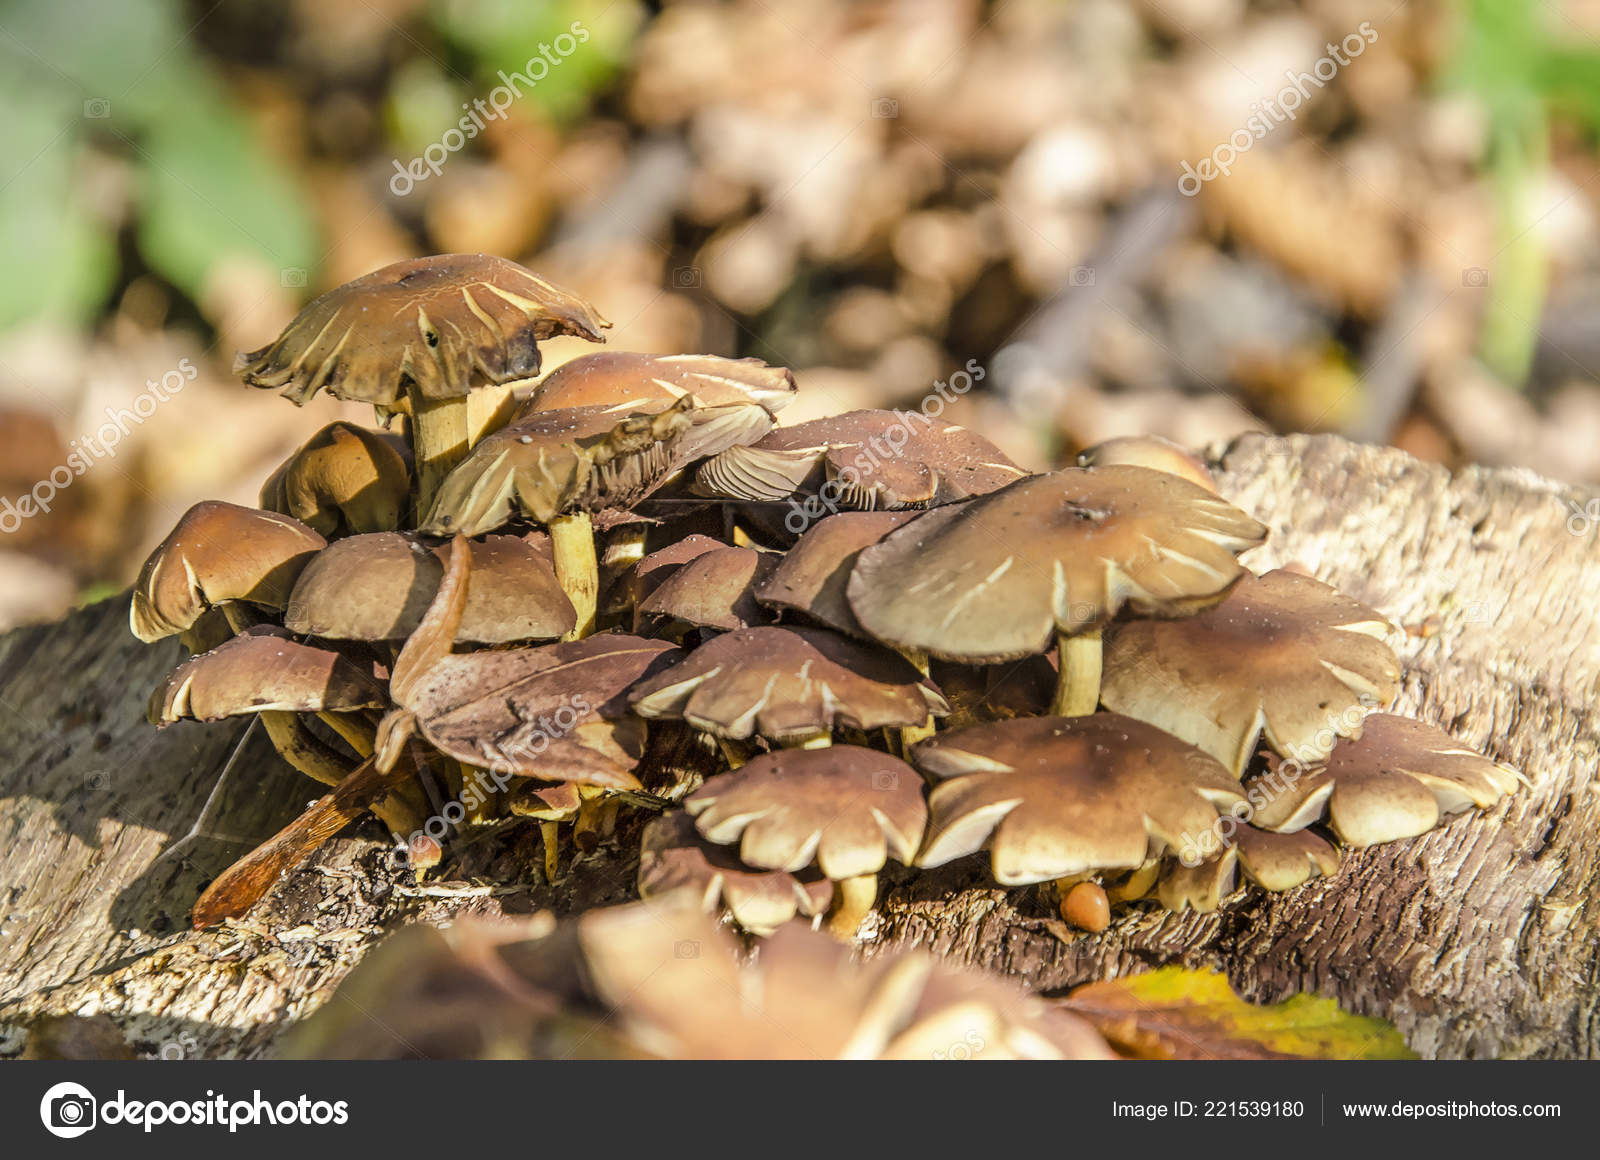 Group Small Brown Mushrooms Flat Caps Growing Wooden Surface